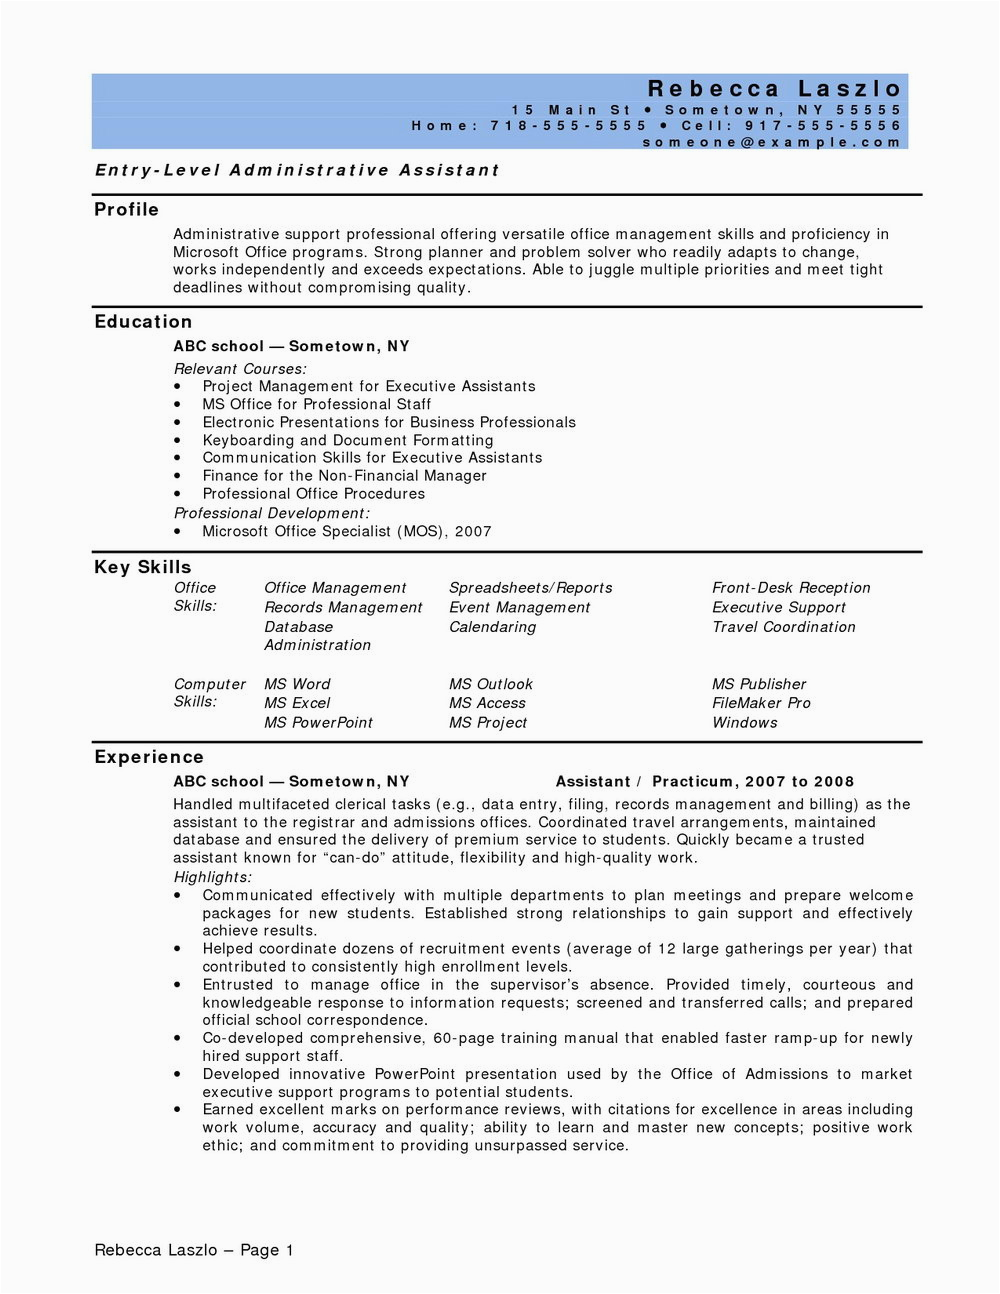 Sample Resume for Medical Billing and Coding with No Experience Medical Coding Resume Sample No Experience